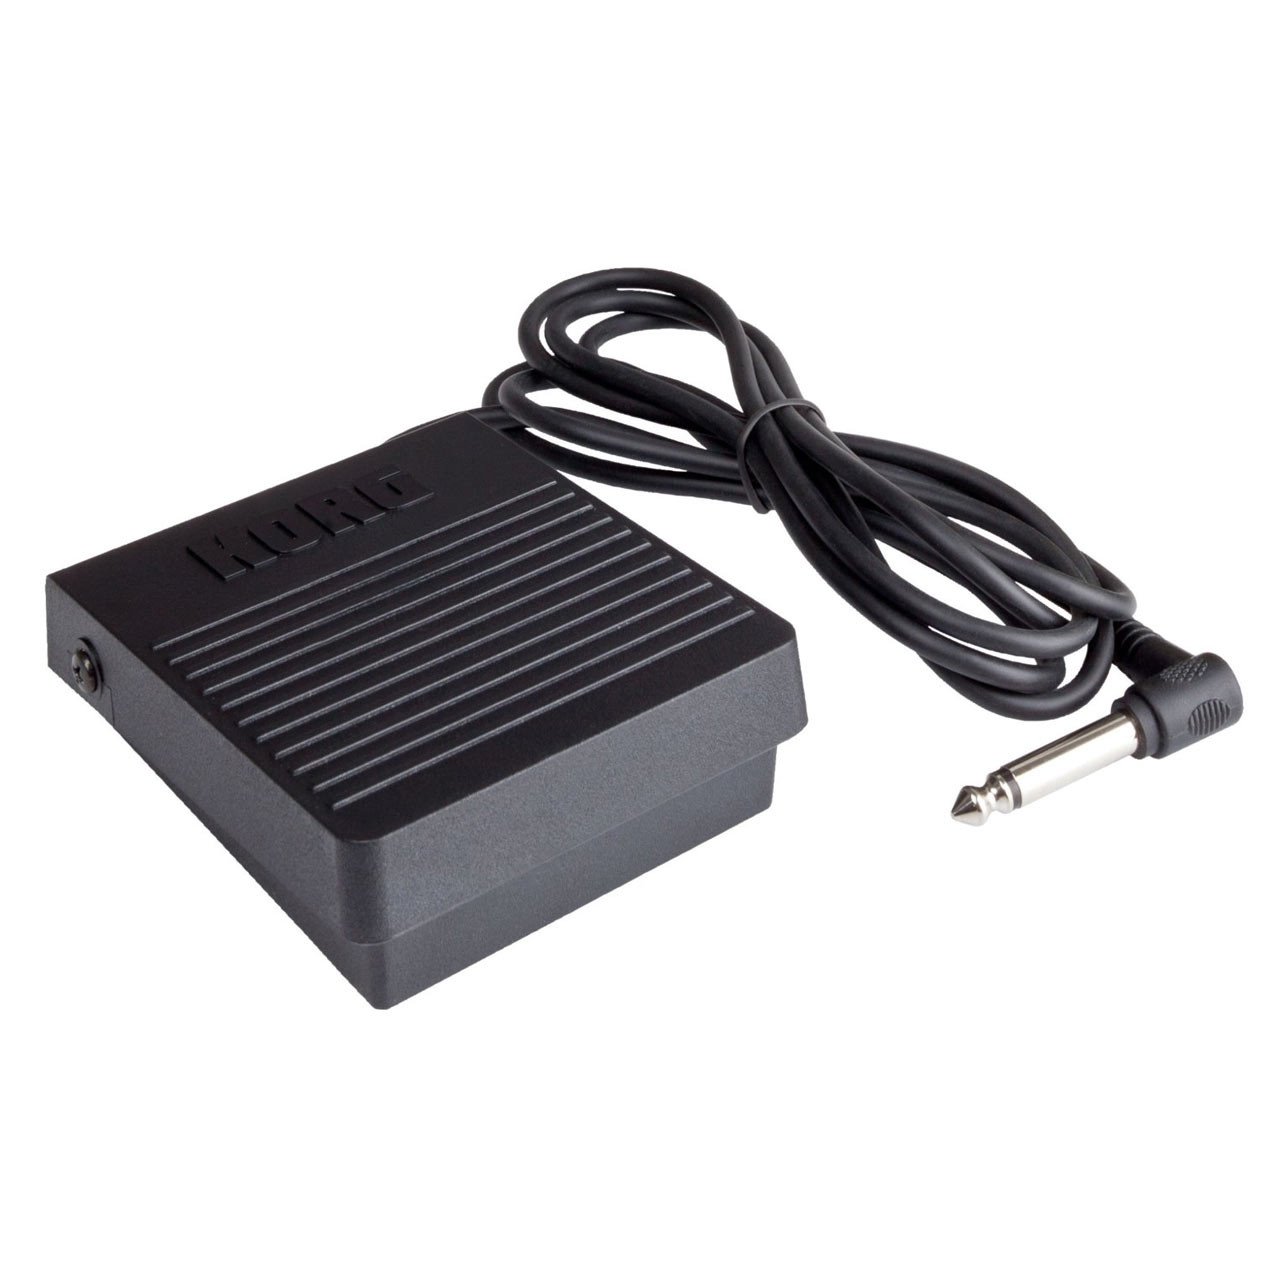 Keyboard Accessories - Korg PS3 (PS-3) Sustain Pedal Footswitch